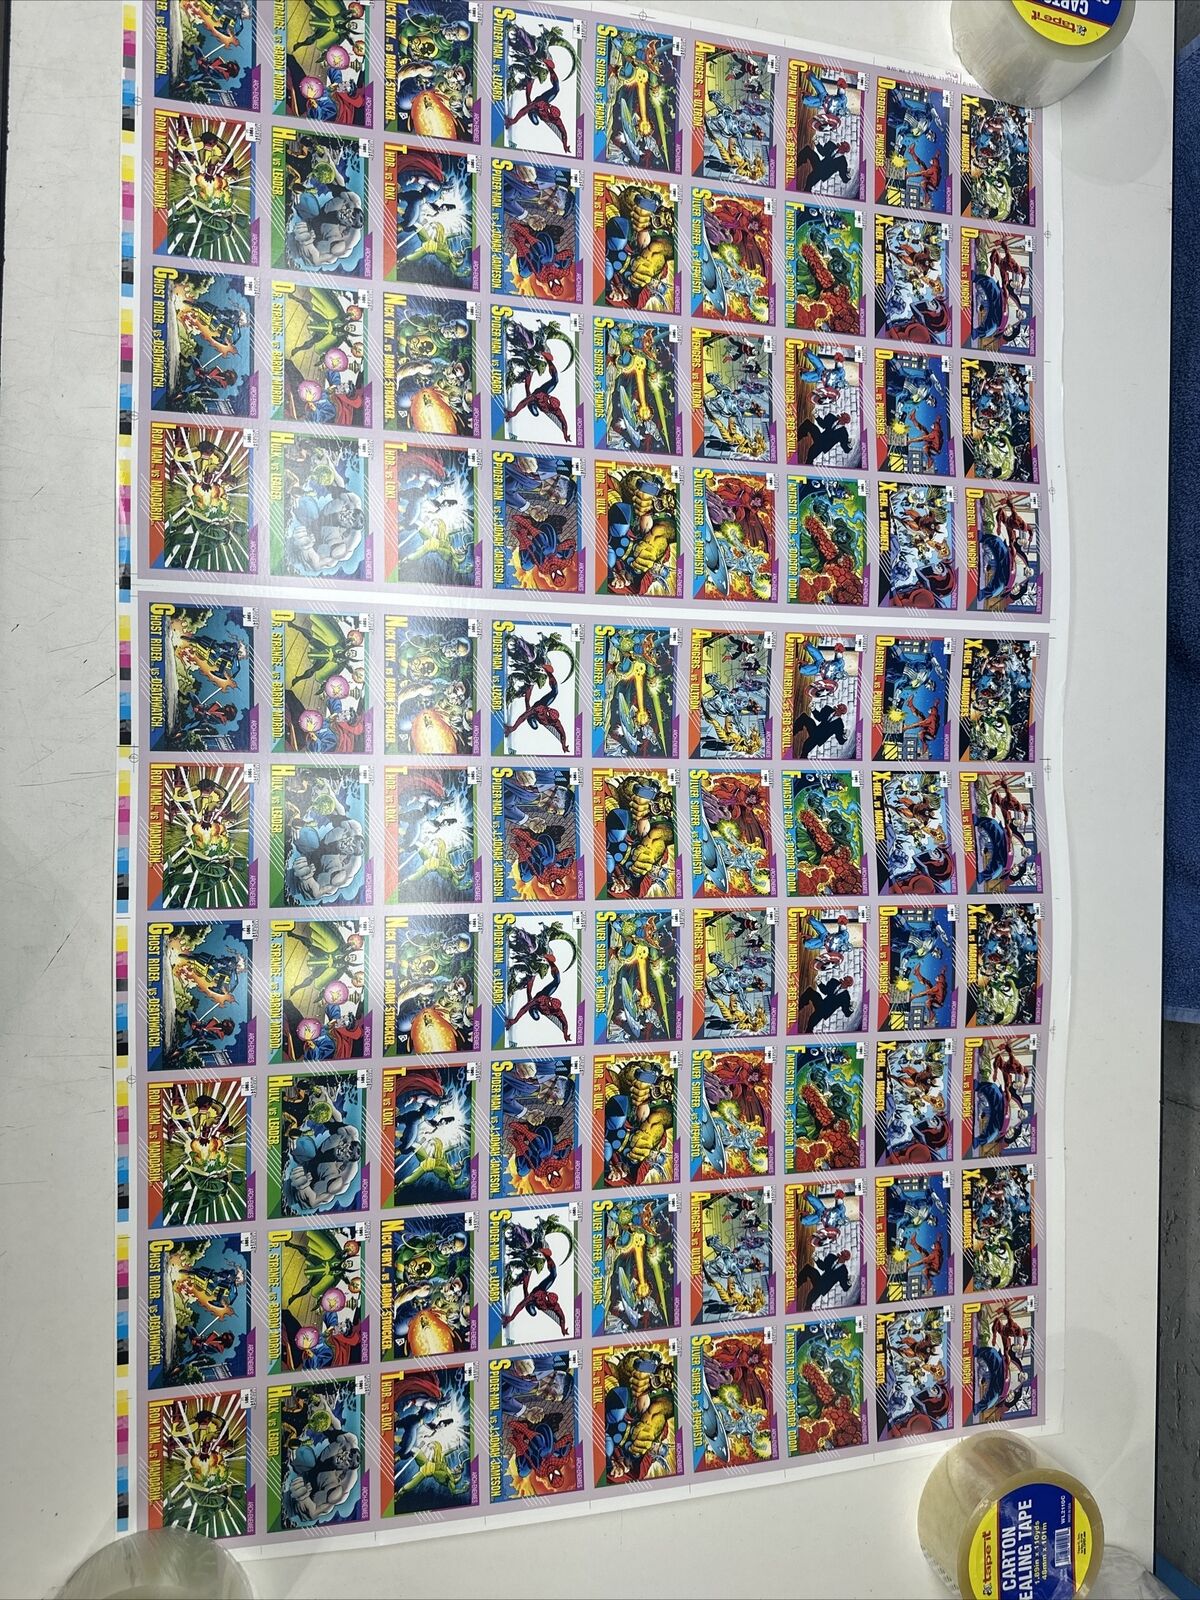 AWESOME 1991 MARVEL COMICS UNCUT SHEET TRADING CARDS